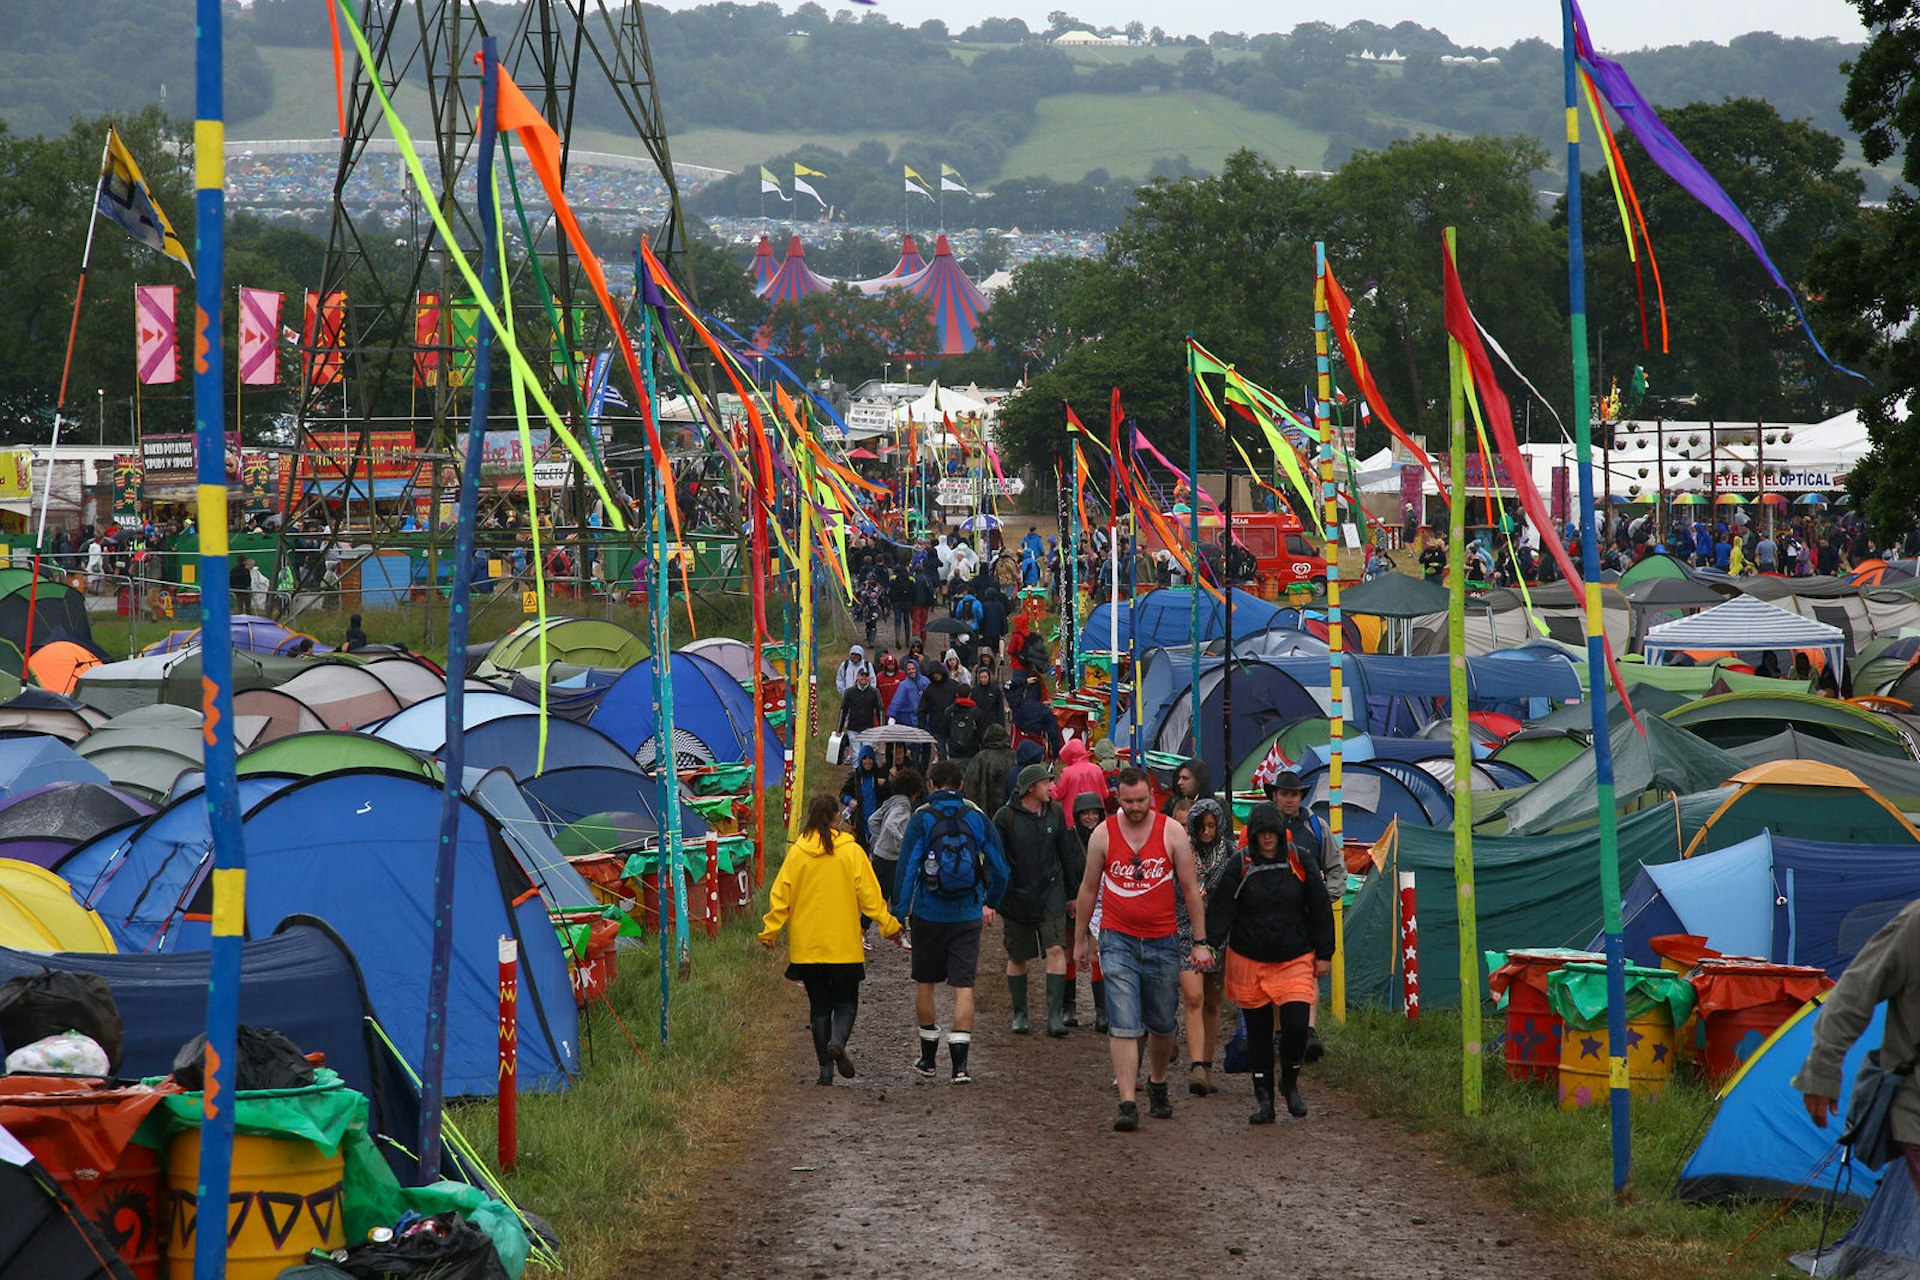 Glastonbury guide - A general view of a campsite during the 44th Glastonbury Festival of Contemporary Performing Arts with colourful streamers lining a muddy pathway. Tents of all colours flank the path which has some raincoat wearing festival goers trudging along it 